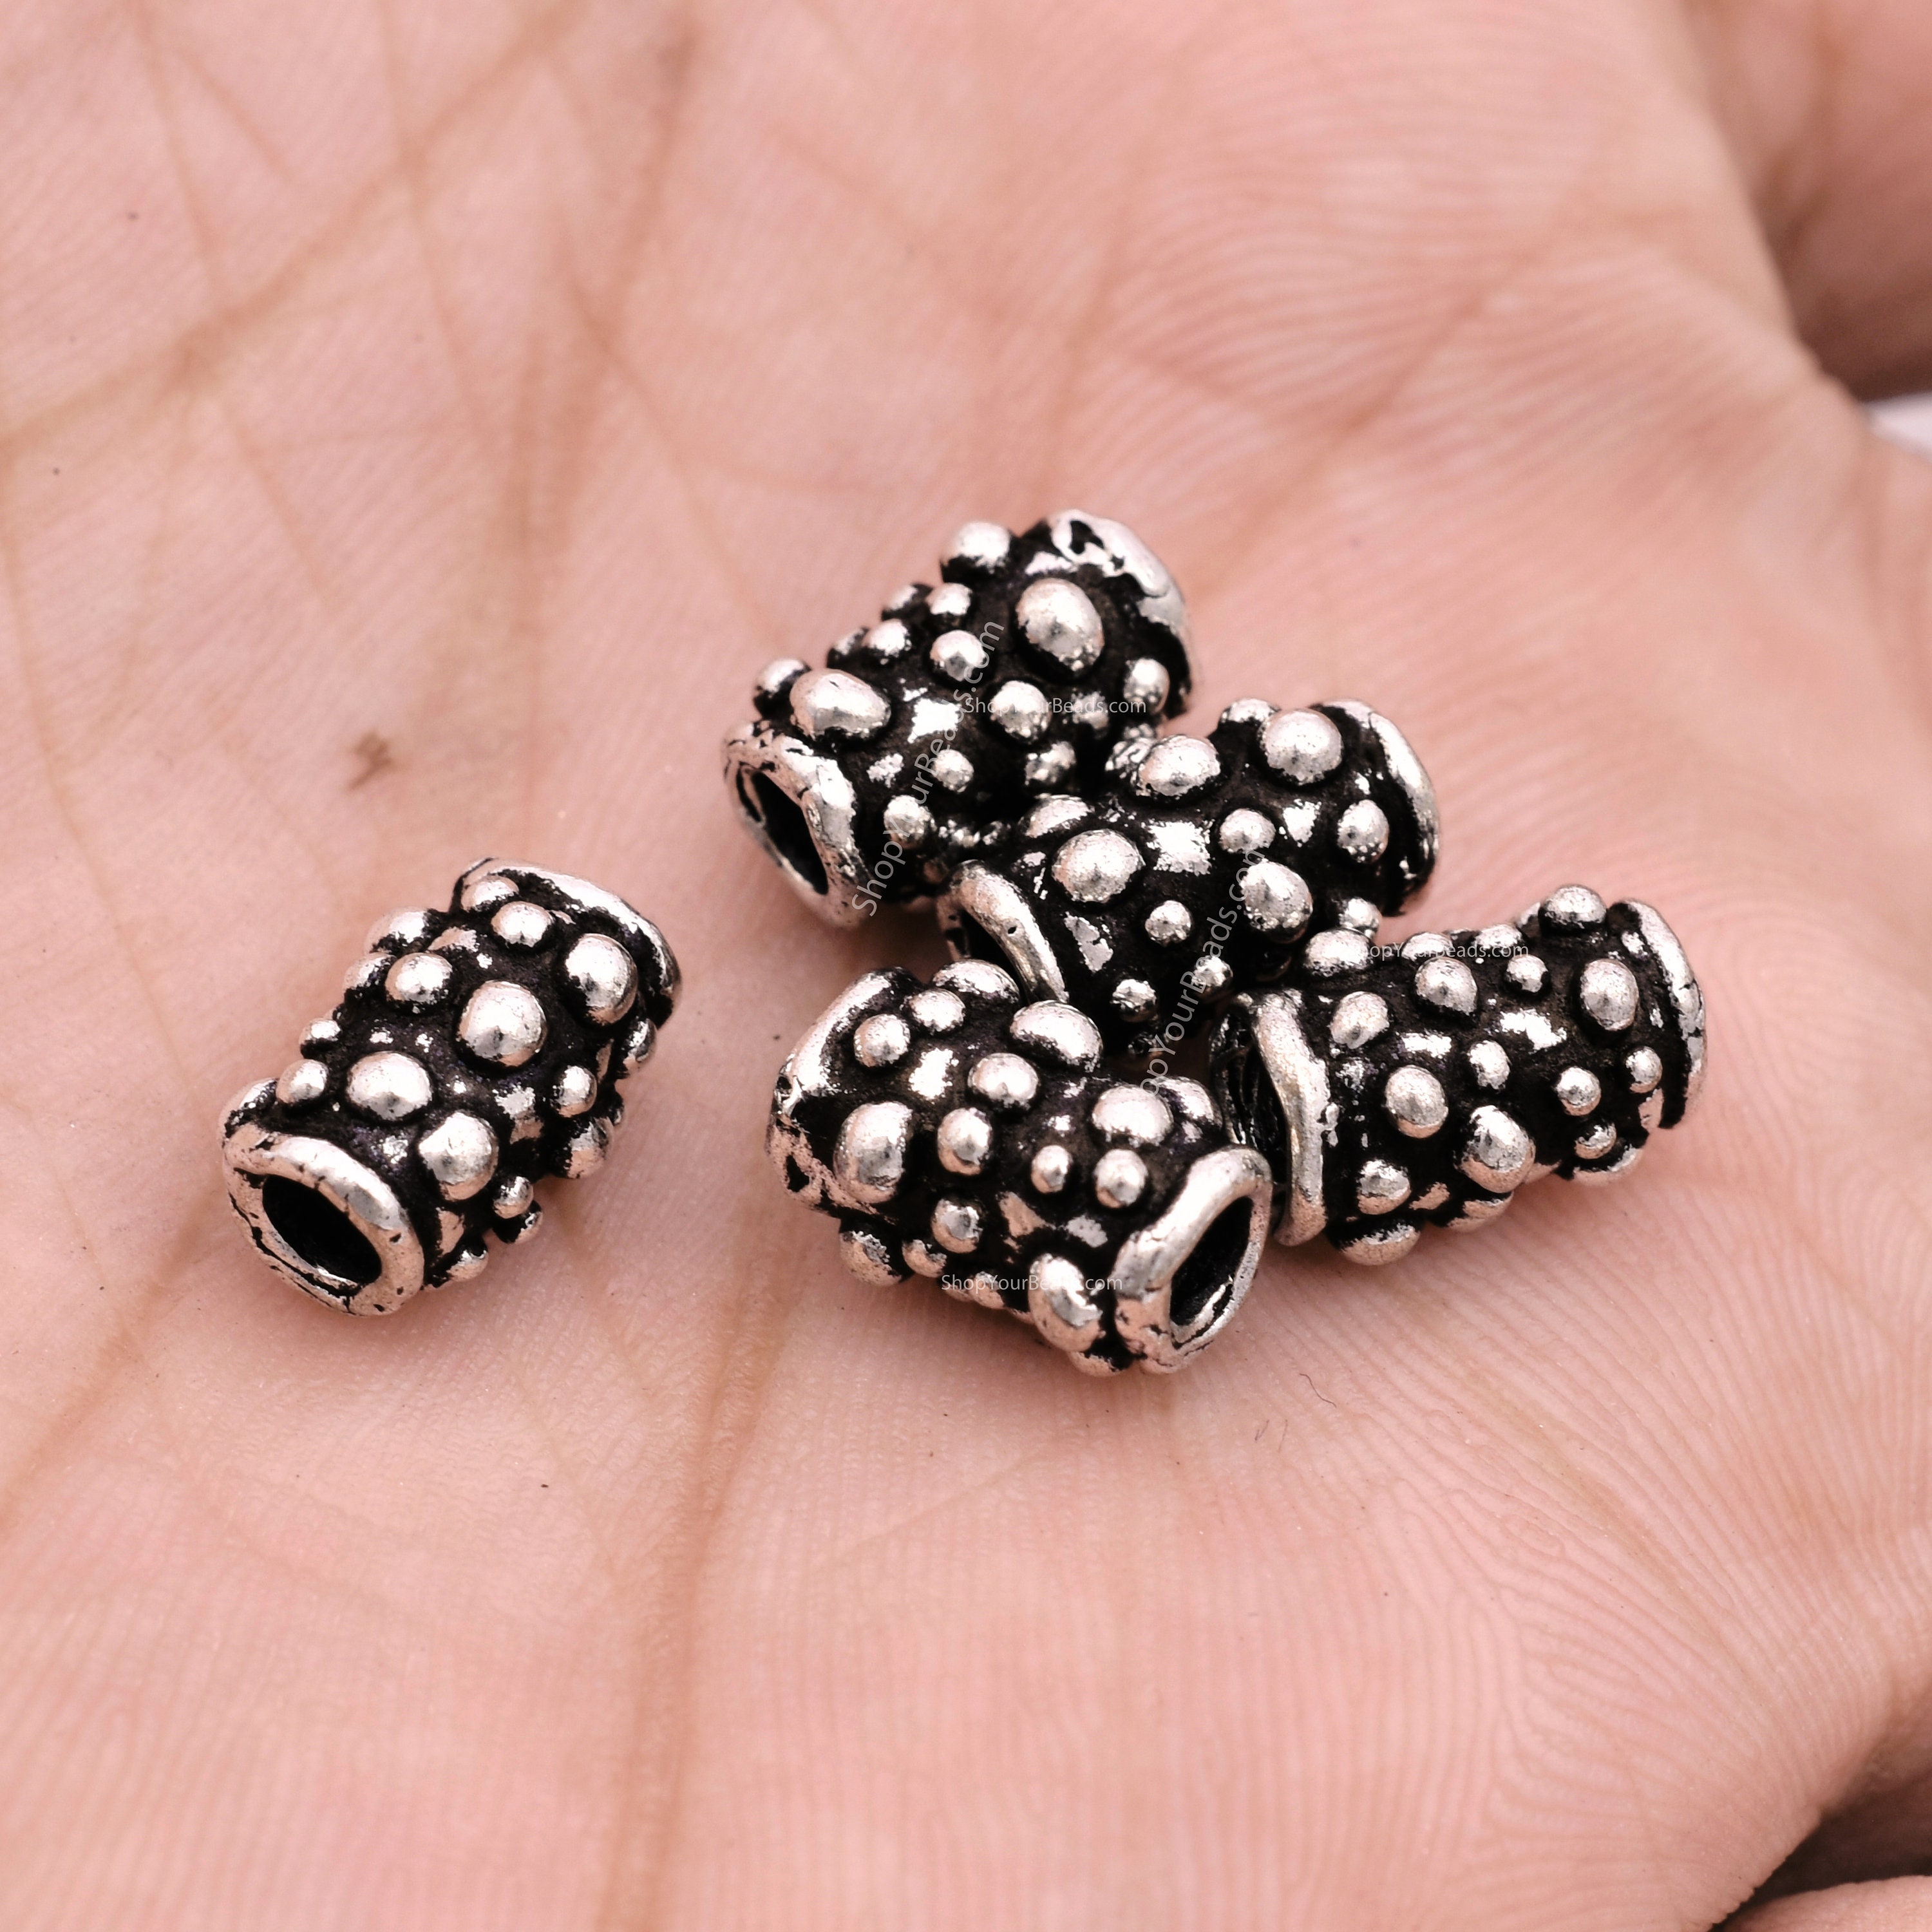 10mm 5pc Silver Plated Tube Beads Artisan Findings Antique 